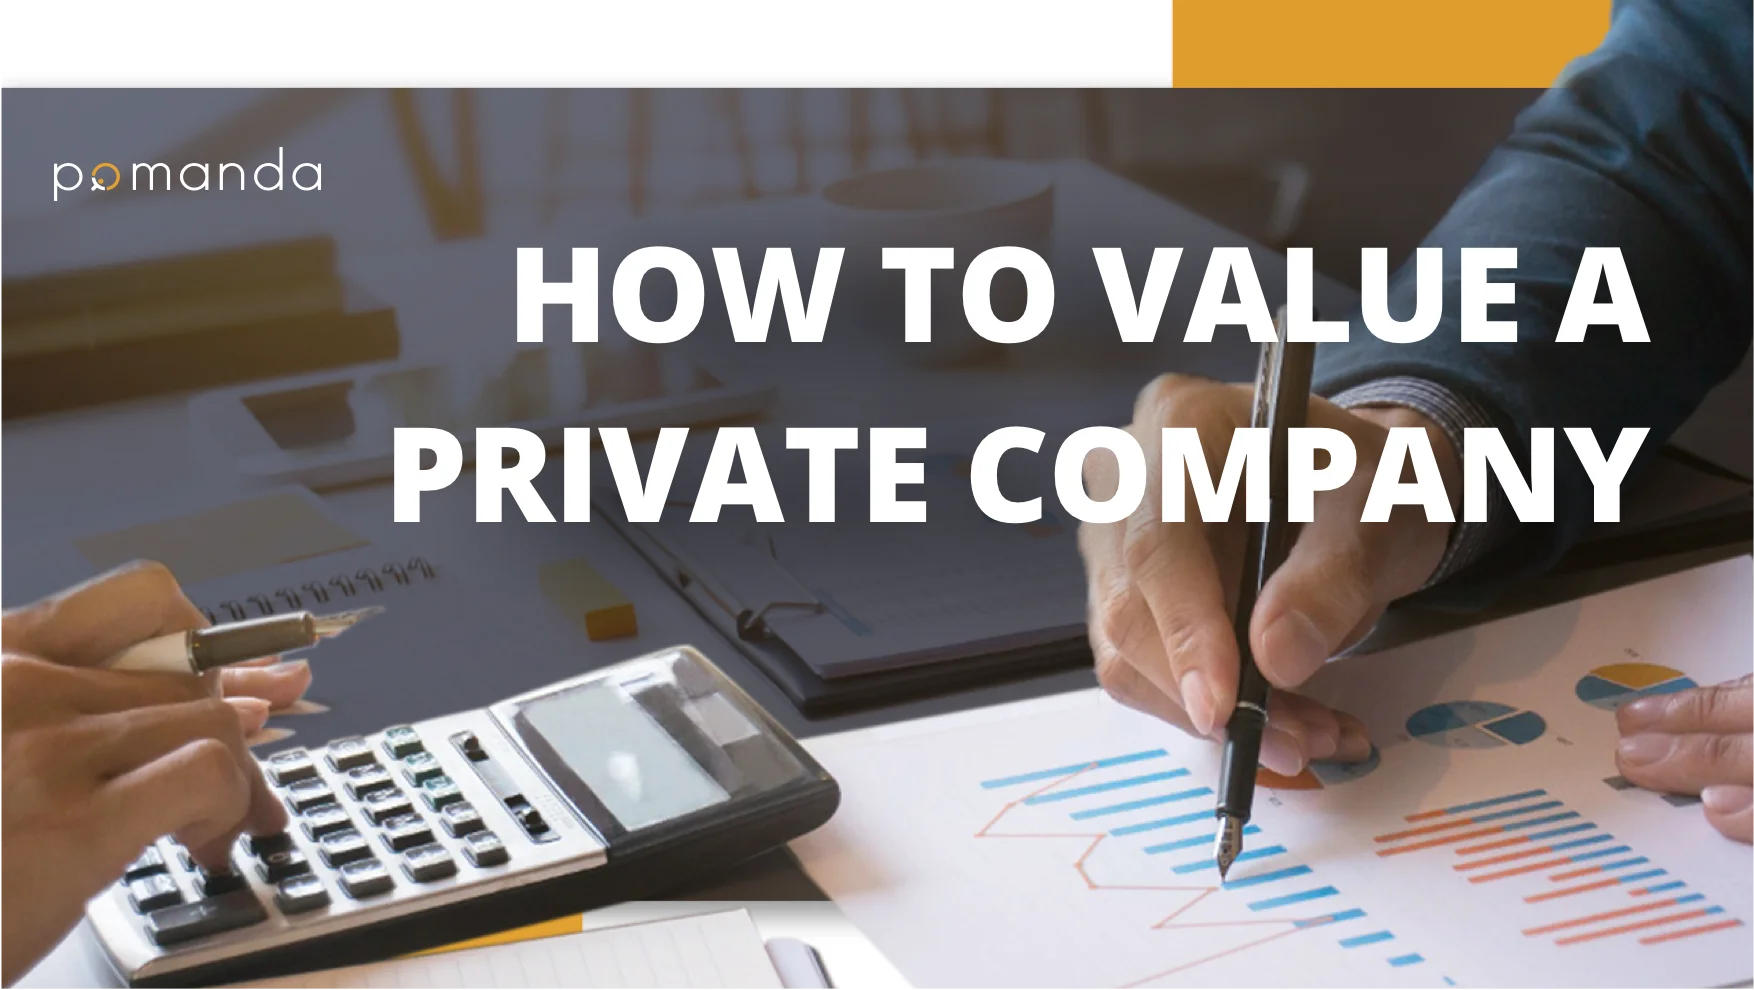 Valuing private companies using multiples